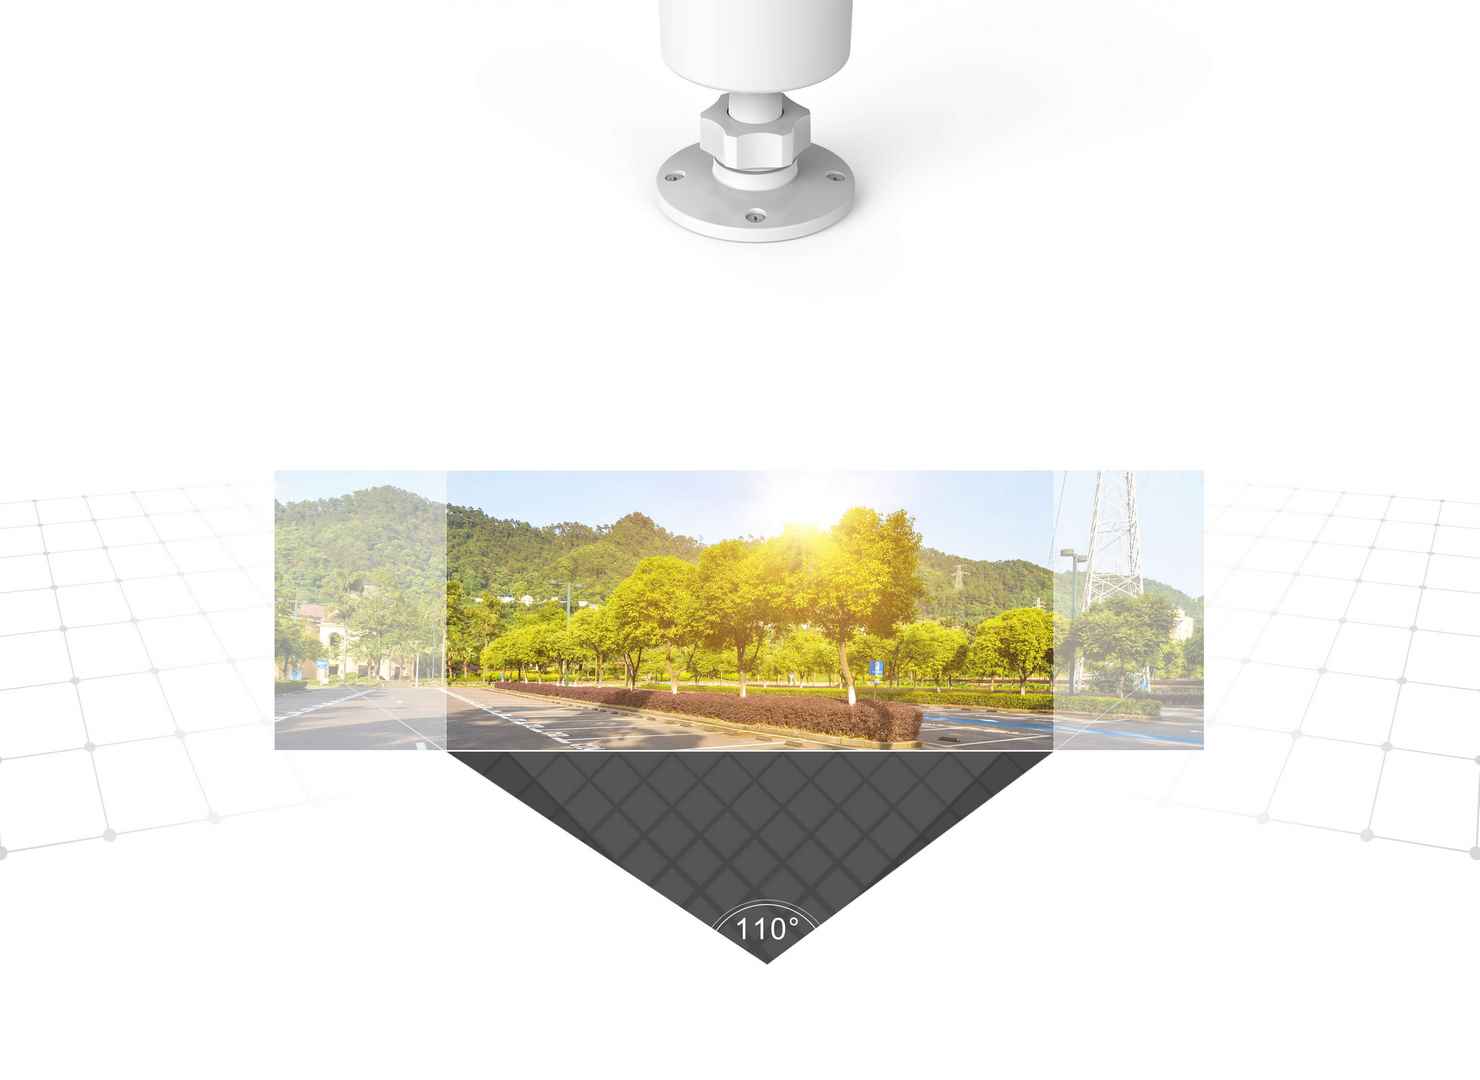 YI OUTDOOR CAMERA - 110° Wide field of vision